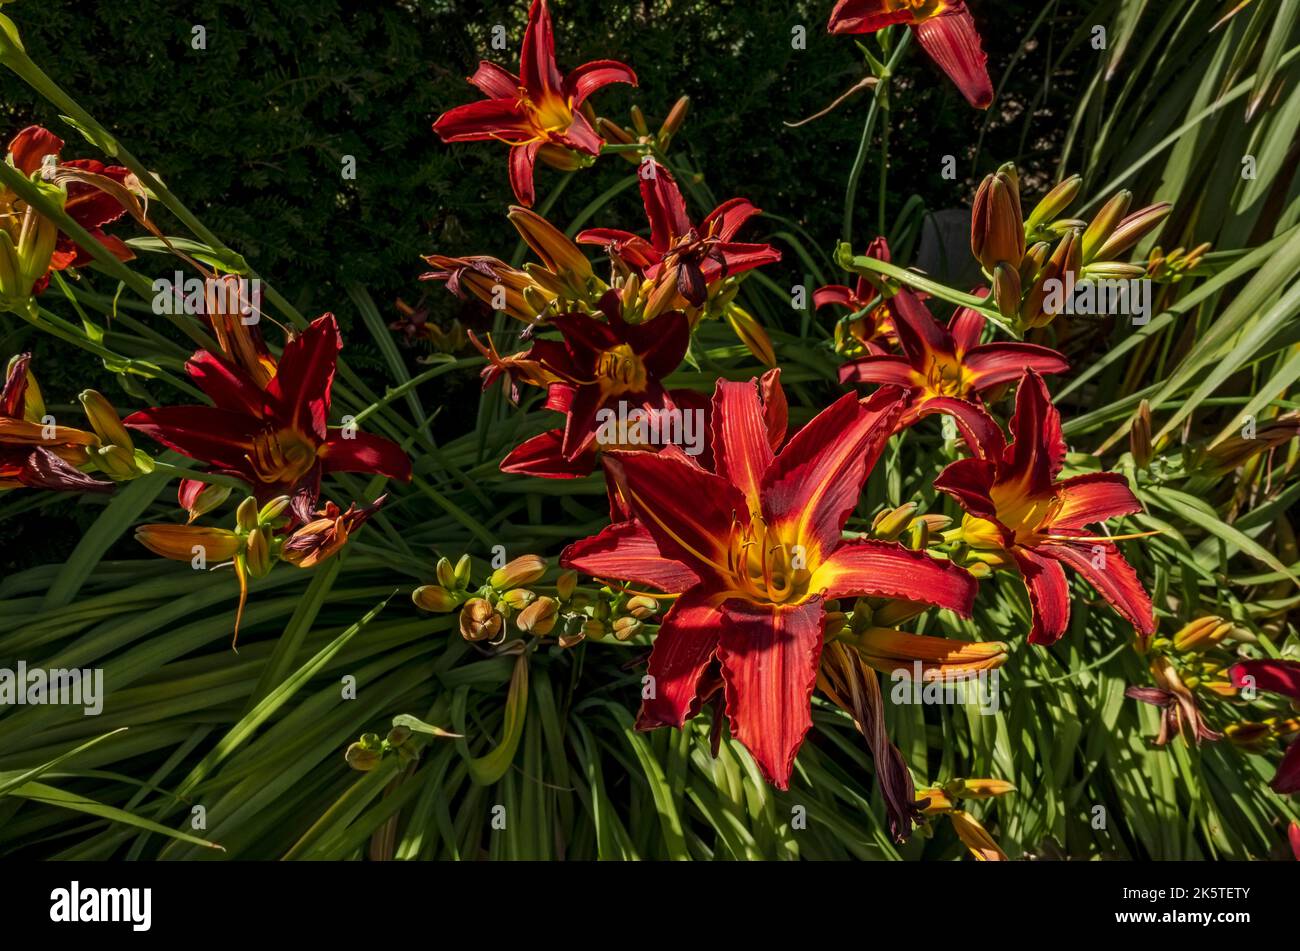 Close up of red and yellow day lily daylily daylilies Hemerocallis flower flowers growing in a garden England UK United Kingdom GB Great Britain Stock Photo